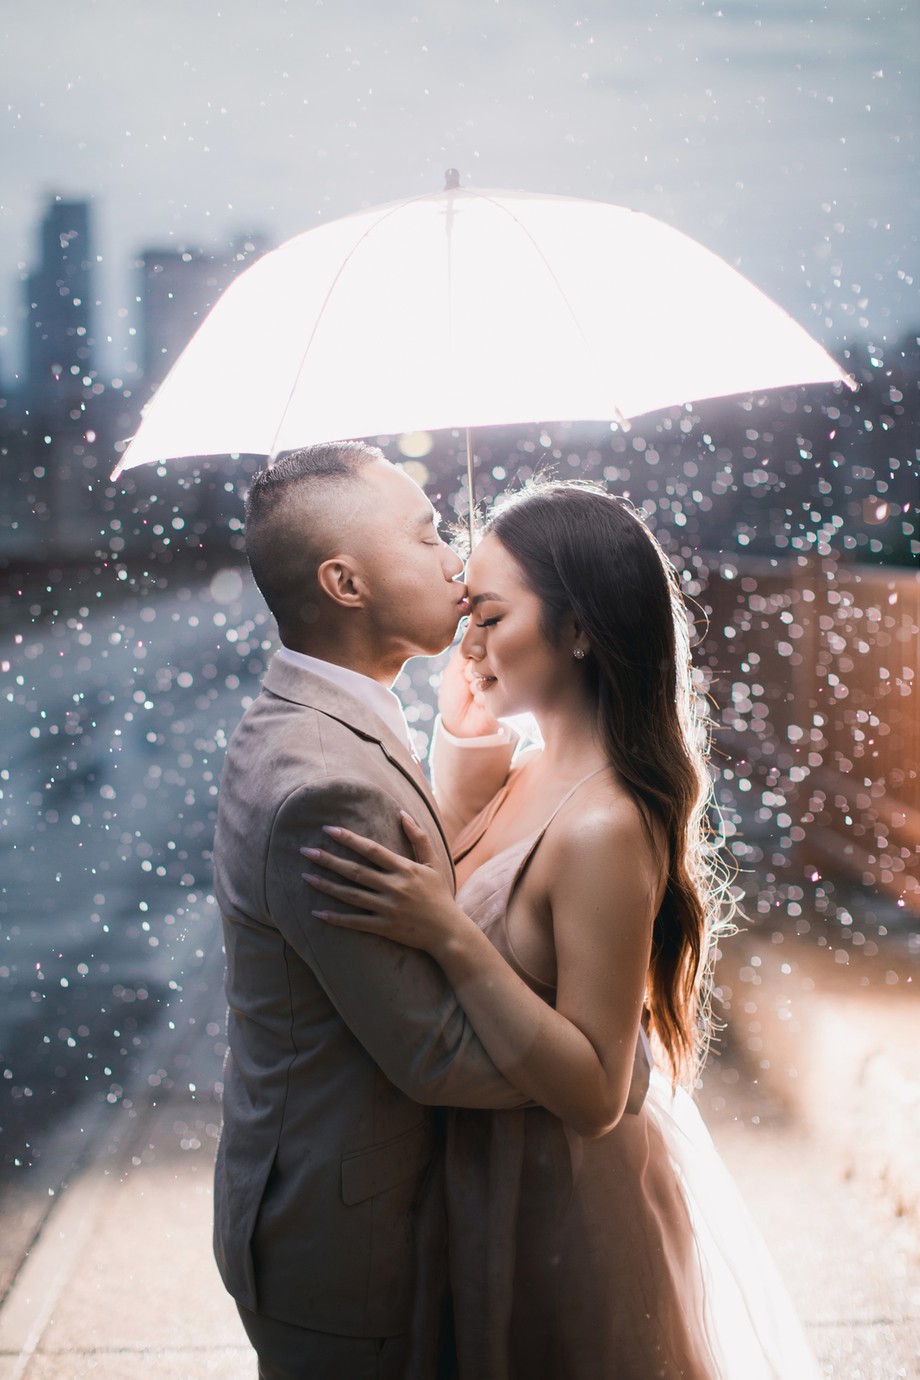 Kiss In The Rain by HouavangPhotography - Wedding Moments Photo Contest